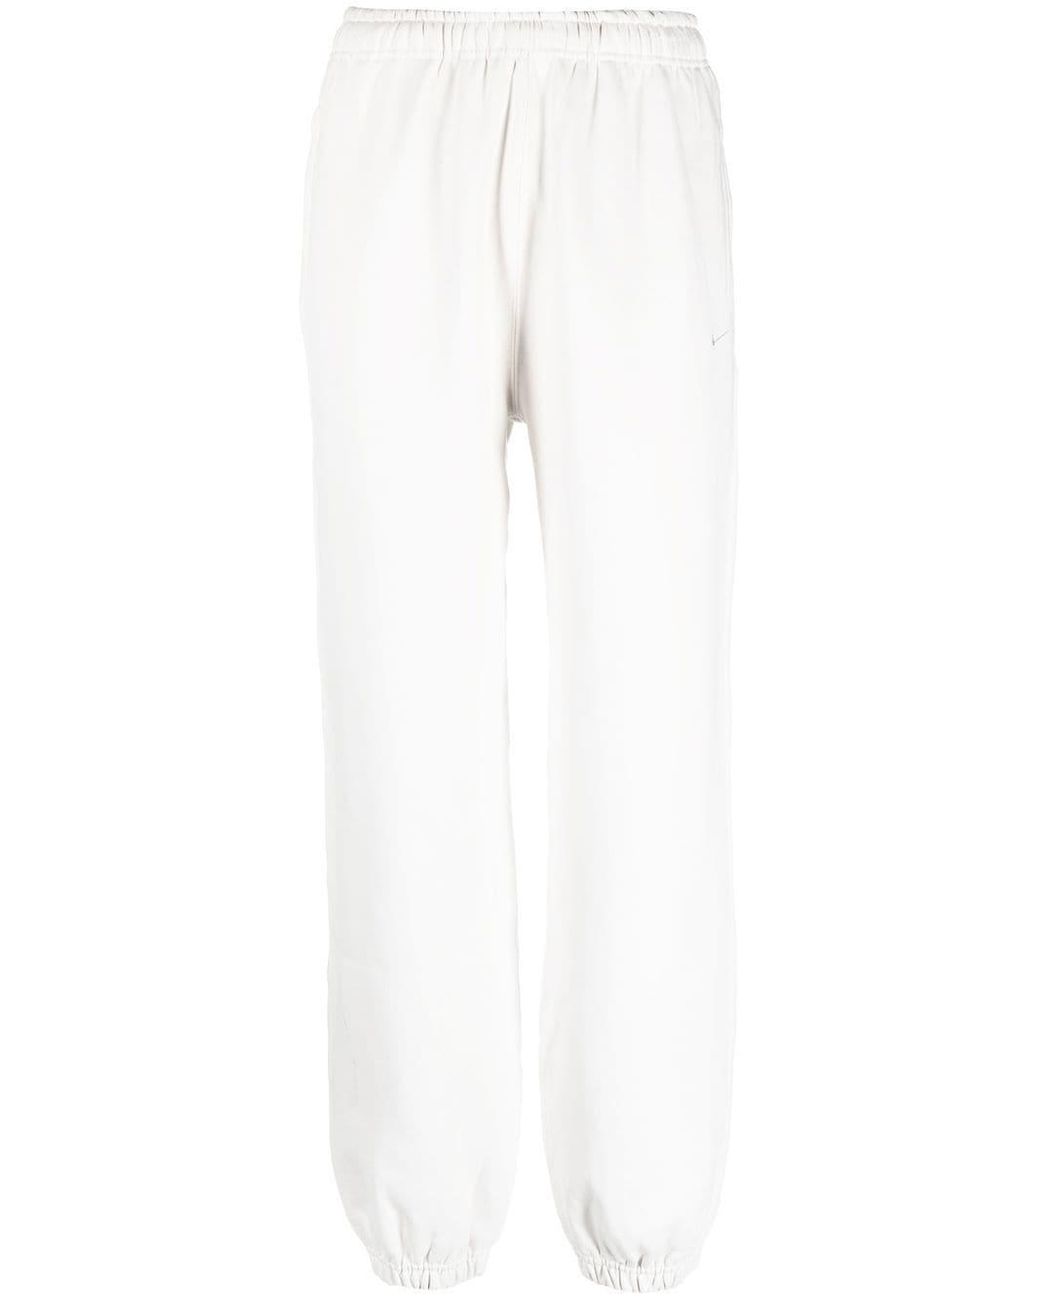 Nike Solo Swoosh Embroidered Track Pants in White | Lyst